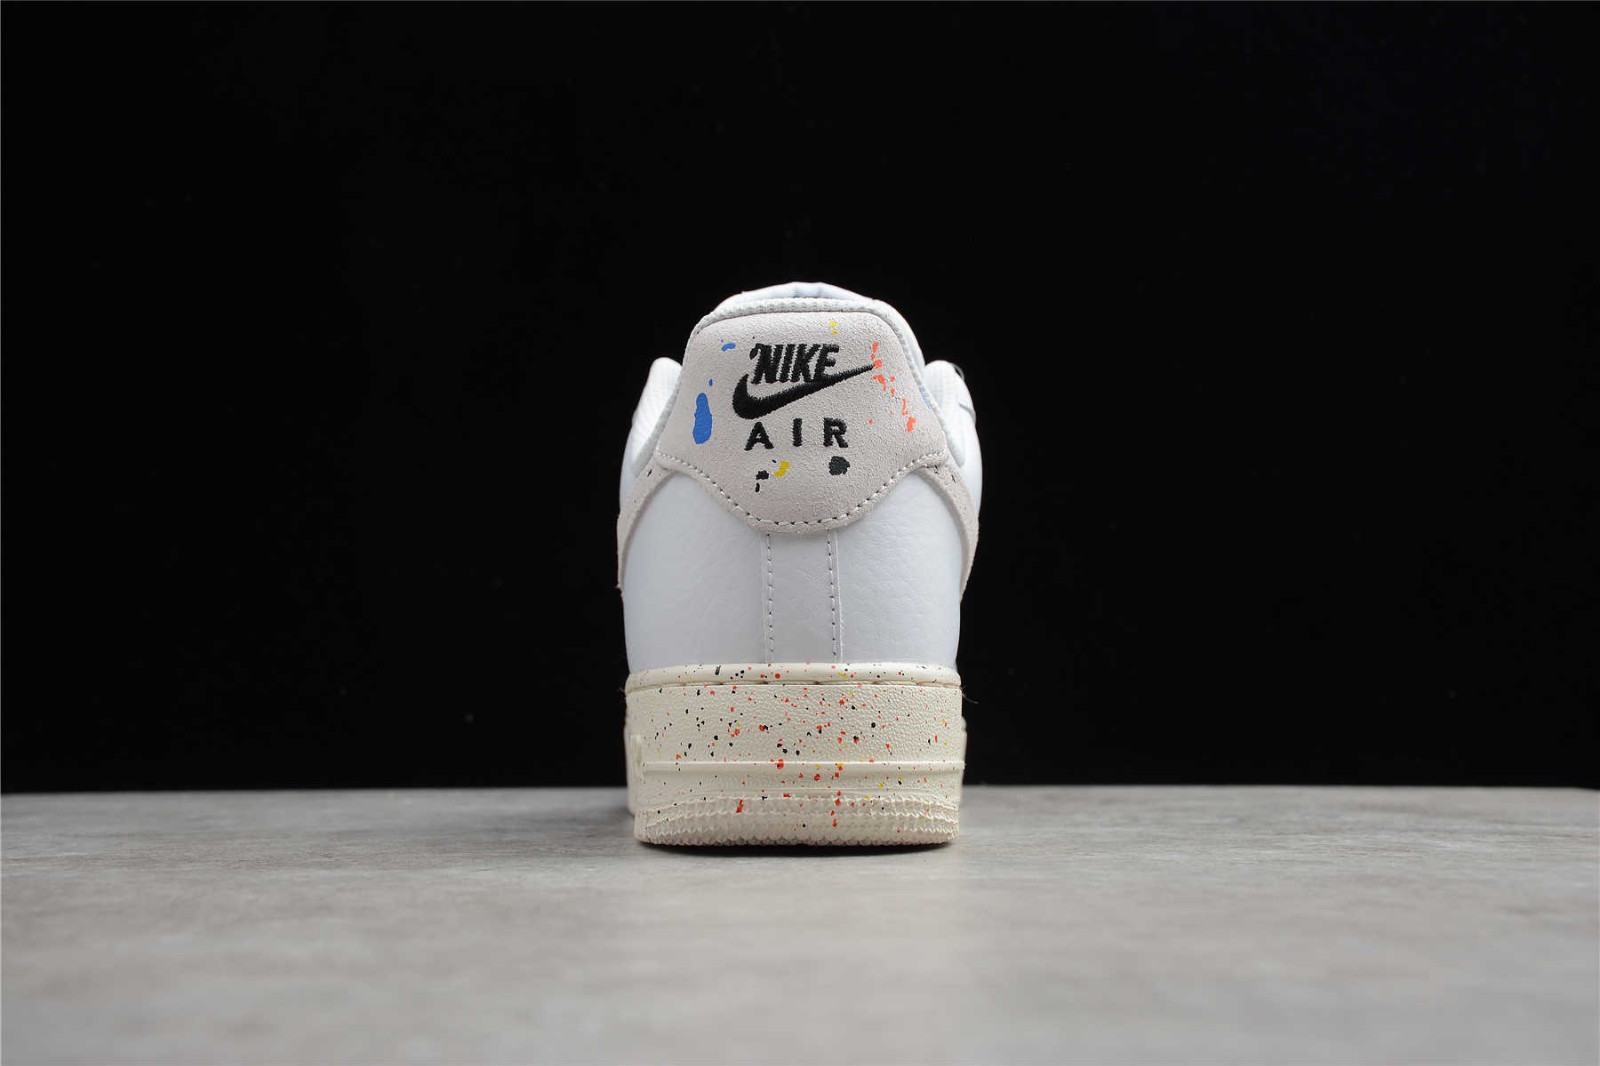 Nike trainer Air Force 1 Low 07 LV8 Paint Splatter White CZ0339